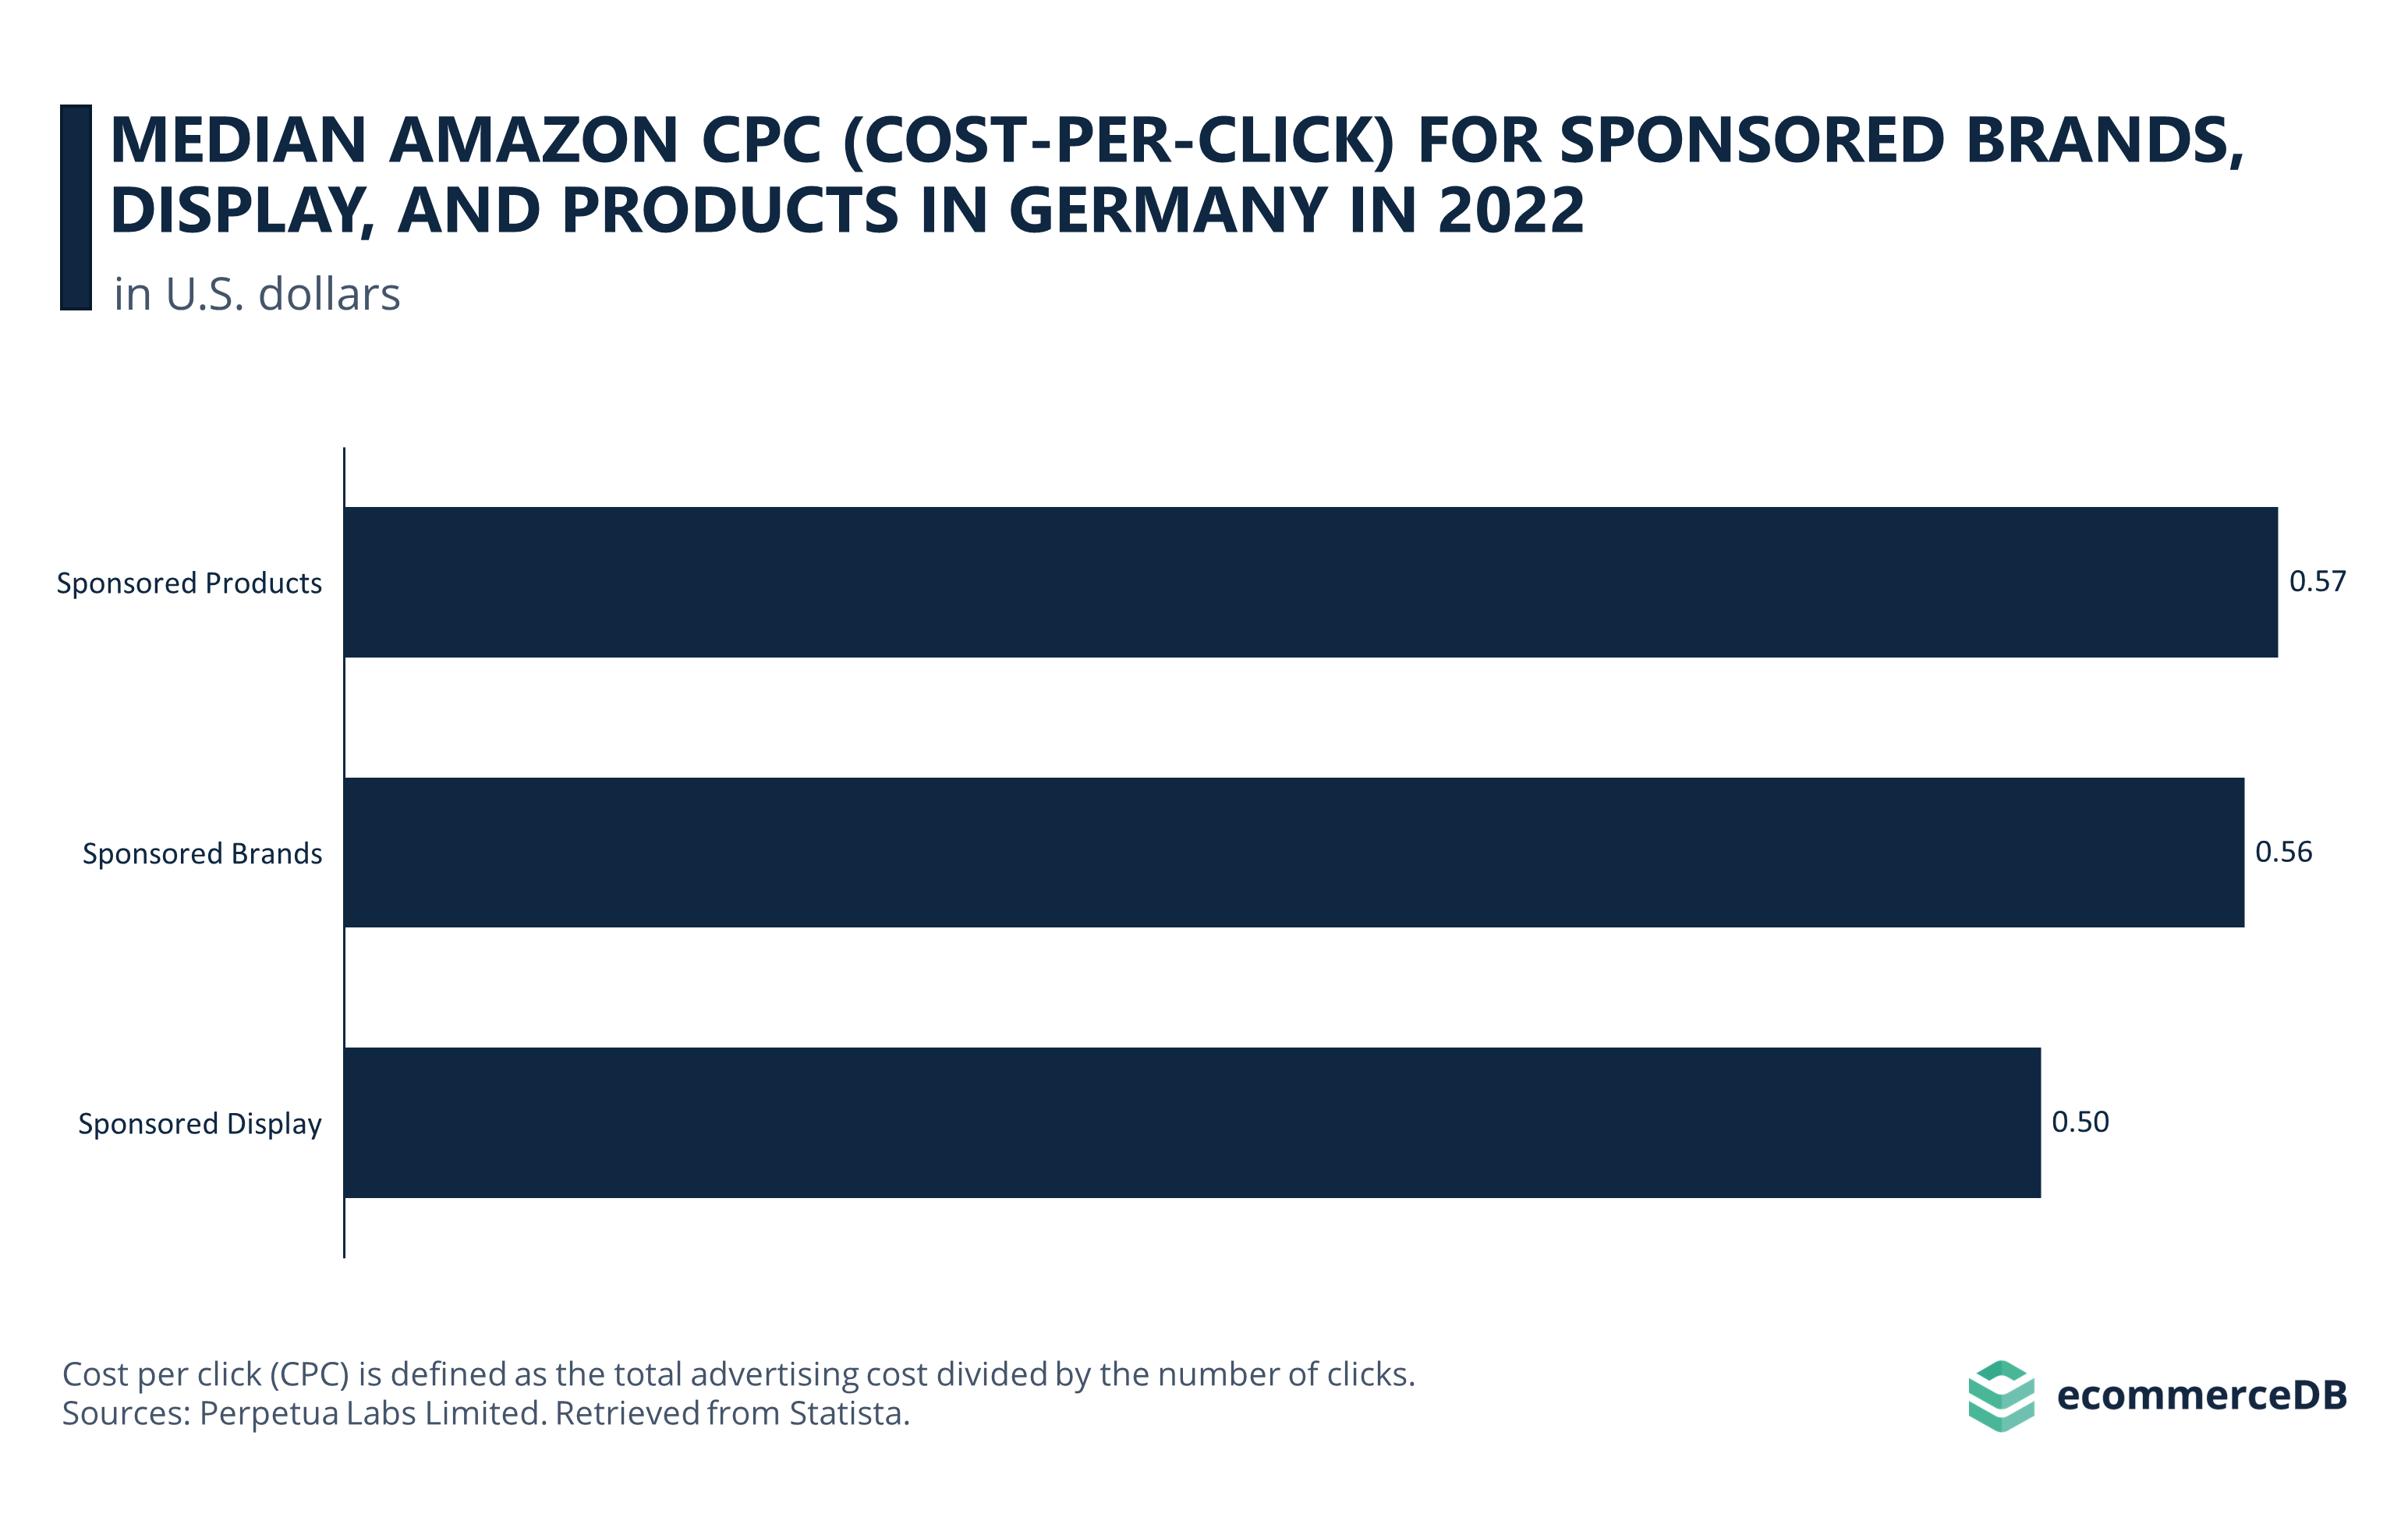 Median Amazon CPC for 3 Ad Types in Germany